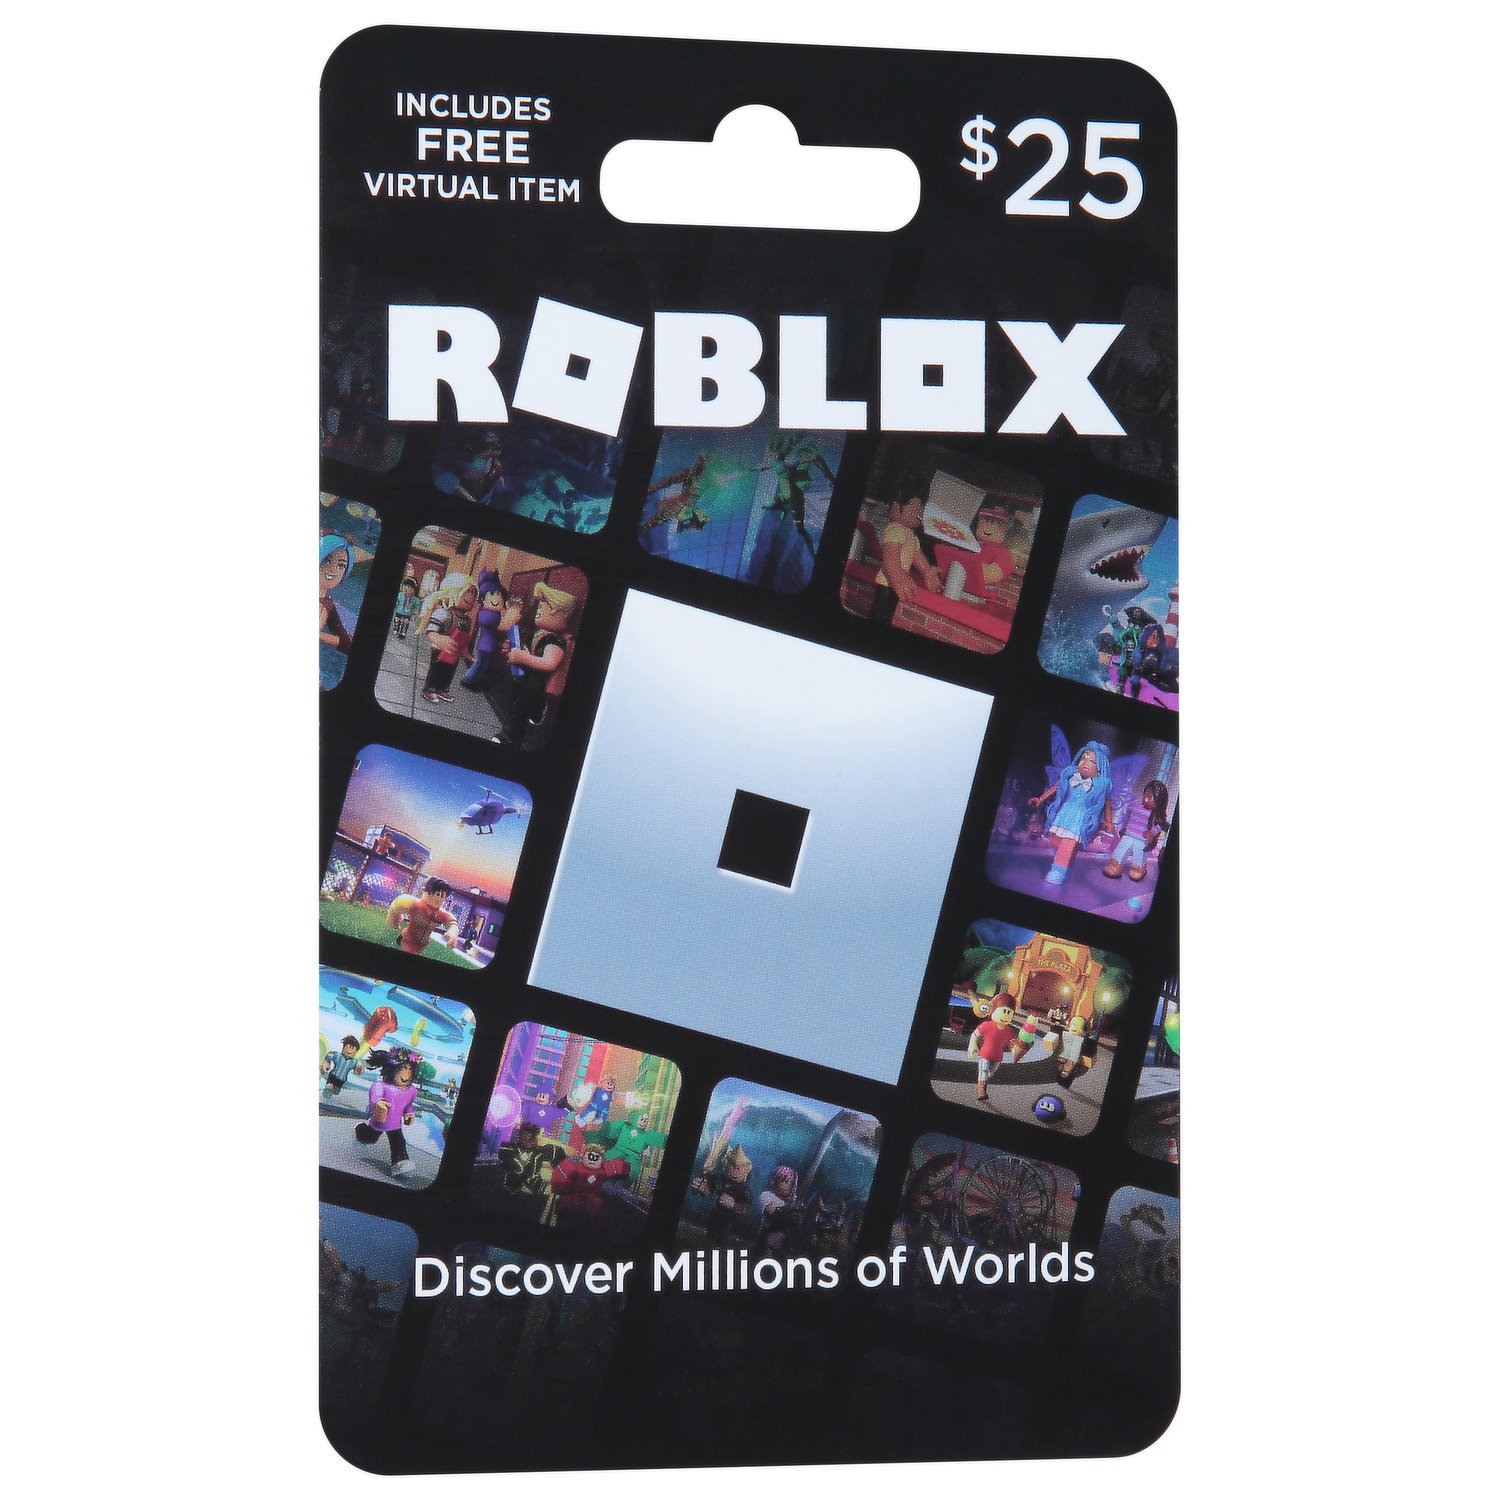 Roblox Is Now RUINING Gift Cards💵🚫 